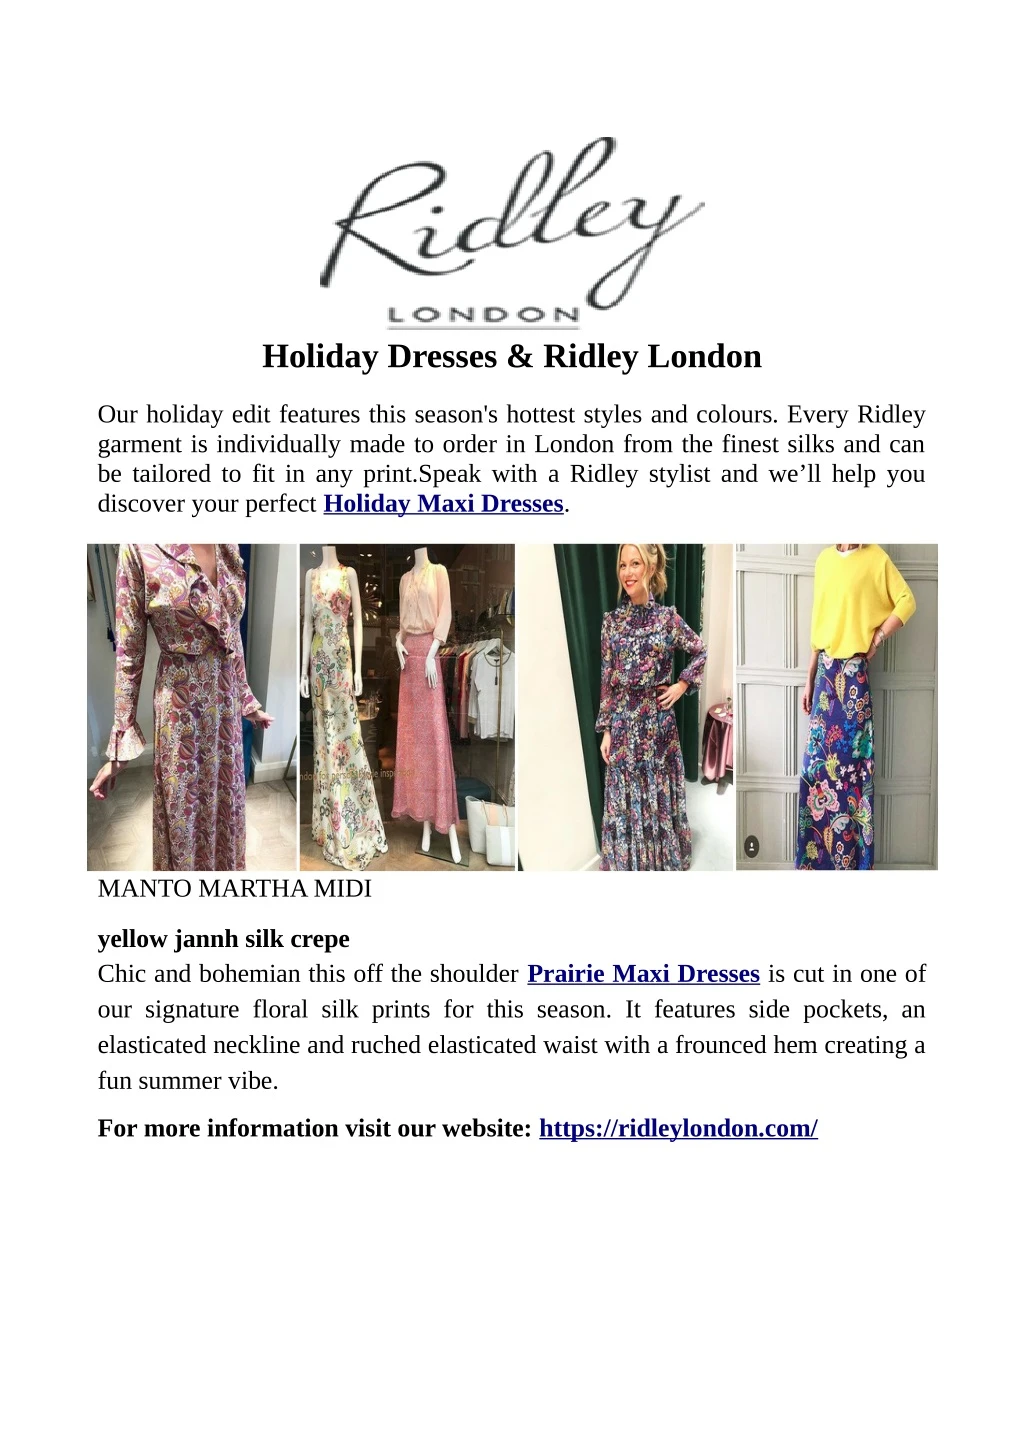 holiday dresses ridley london